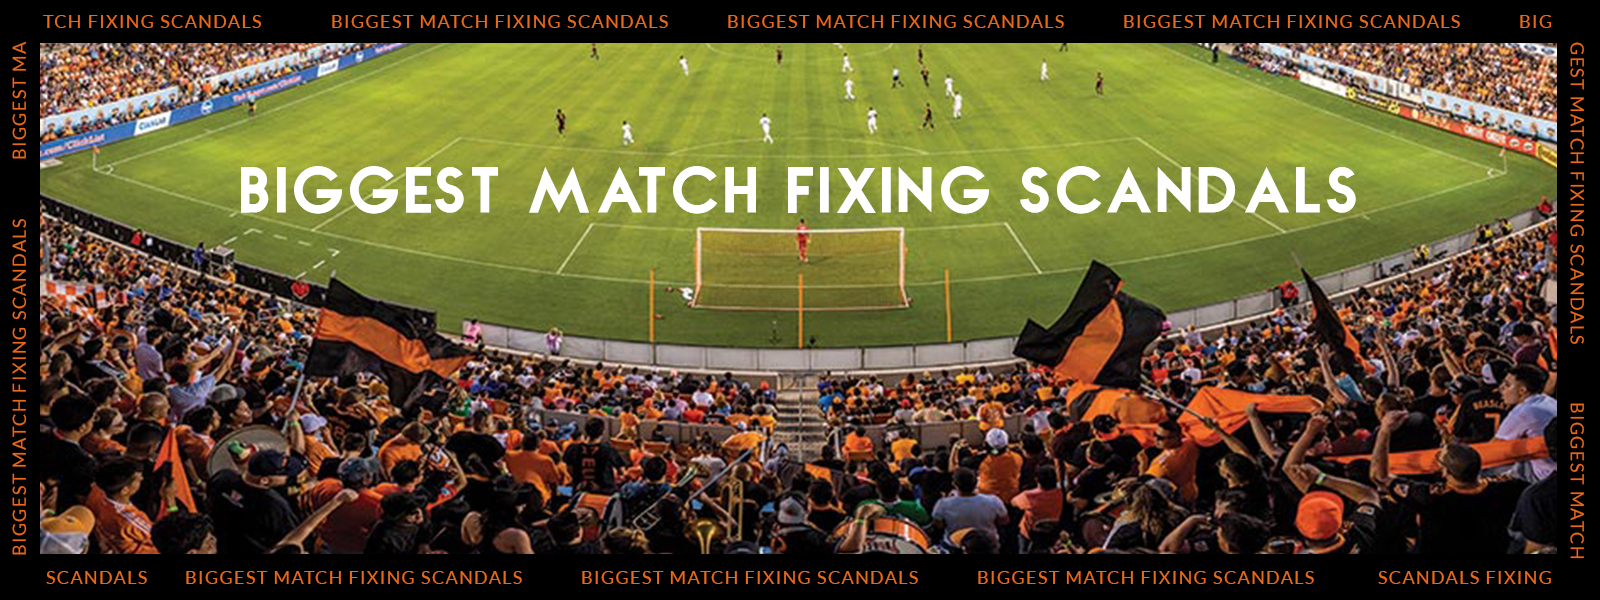 History Biggest Match Fixing Scandals [Infographic]